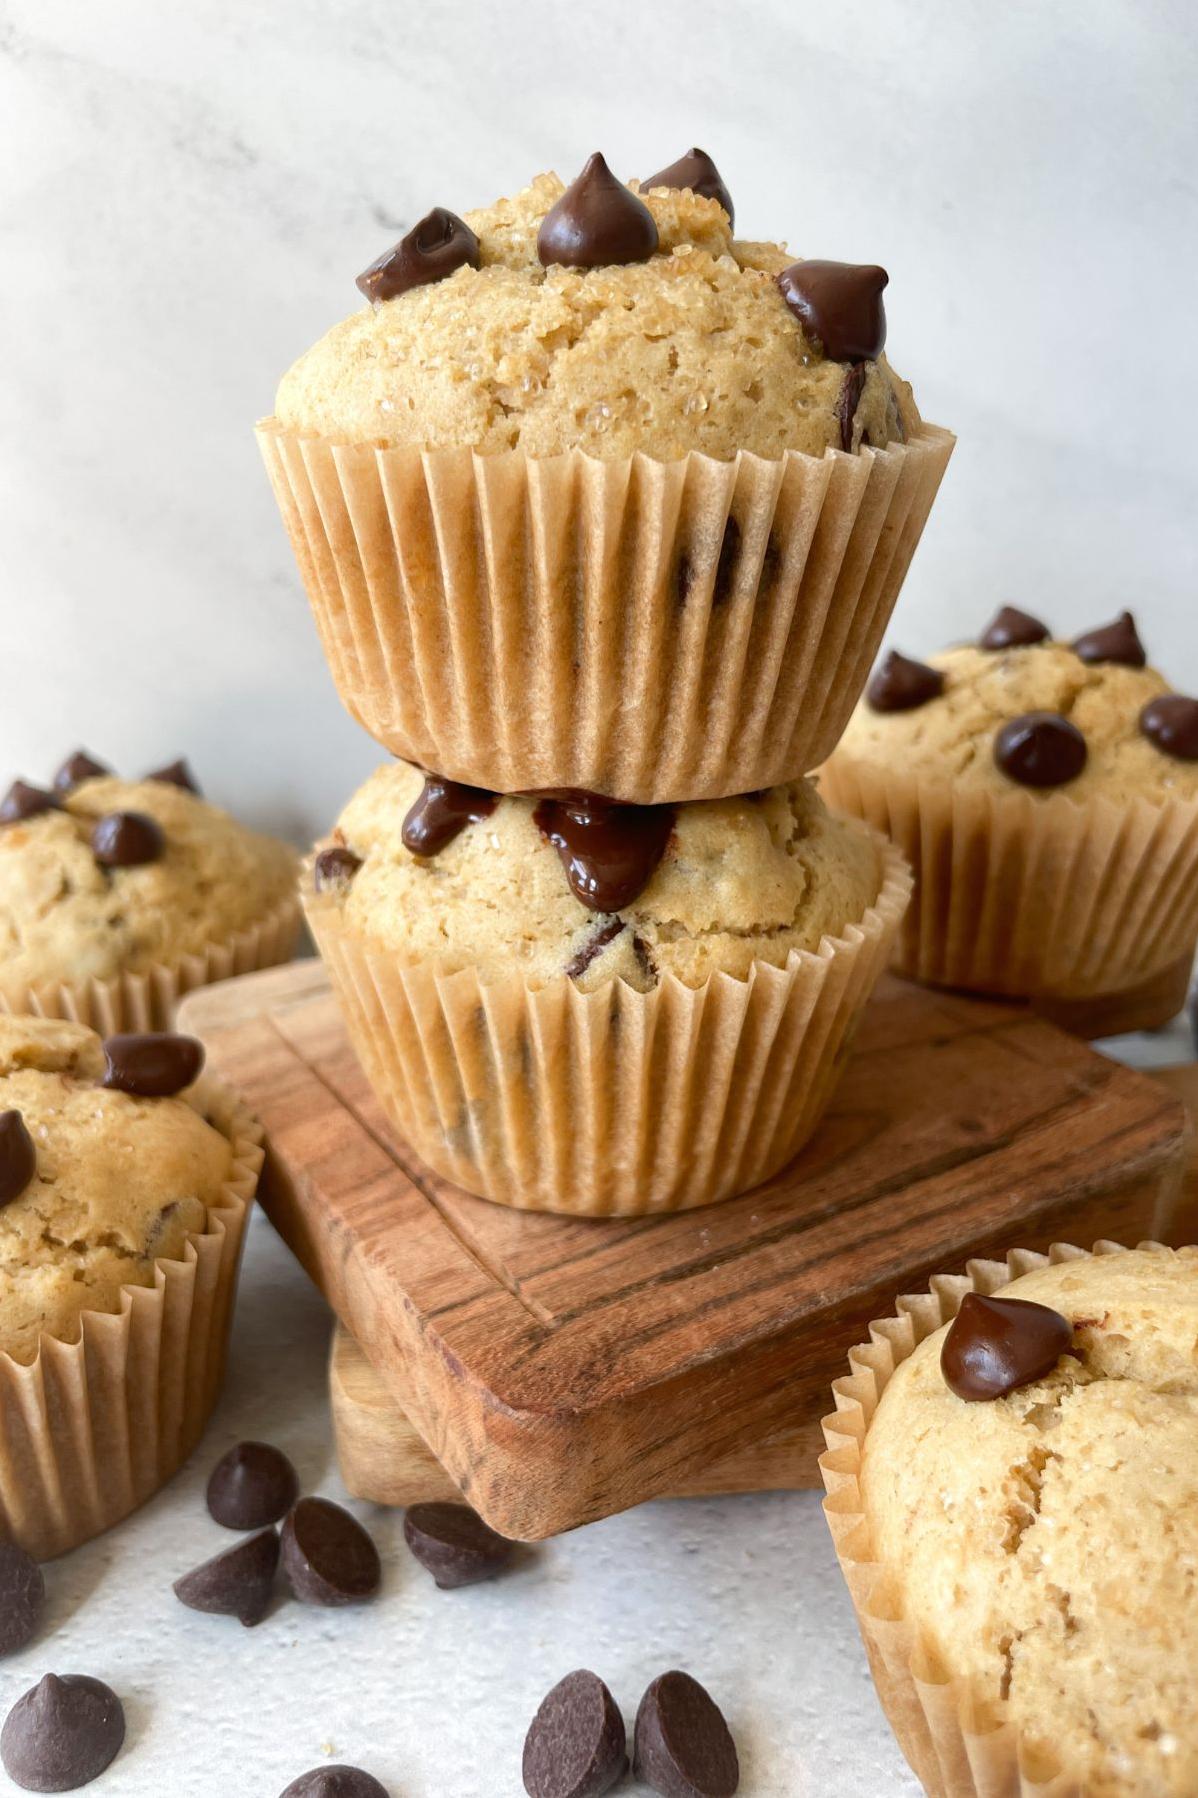  Add your favorite mix-ins, from chocolate chips to blueberries, to customize your muffins.